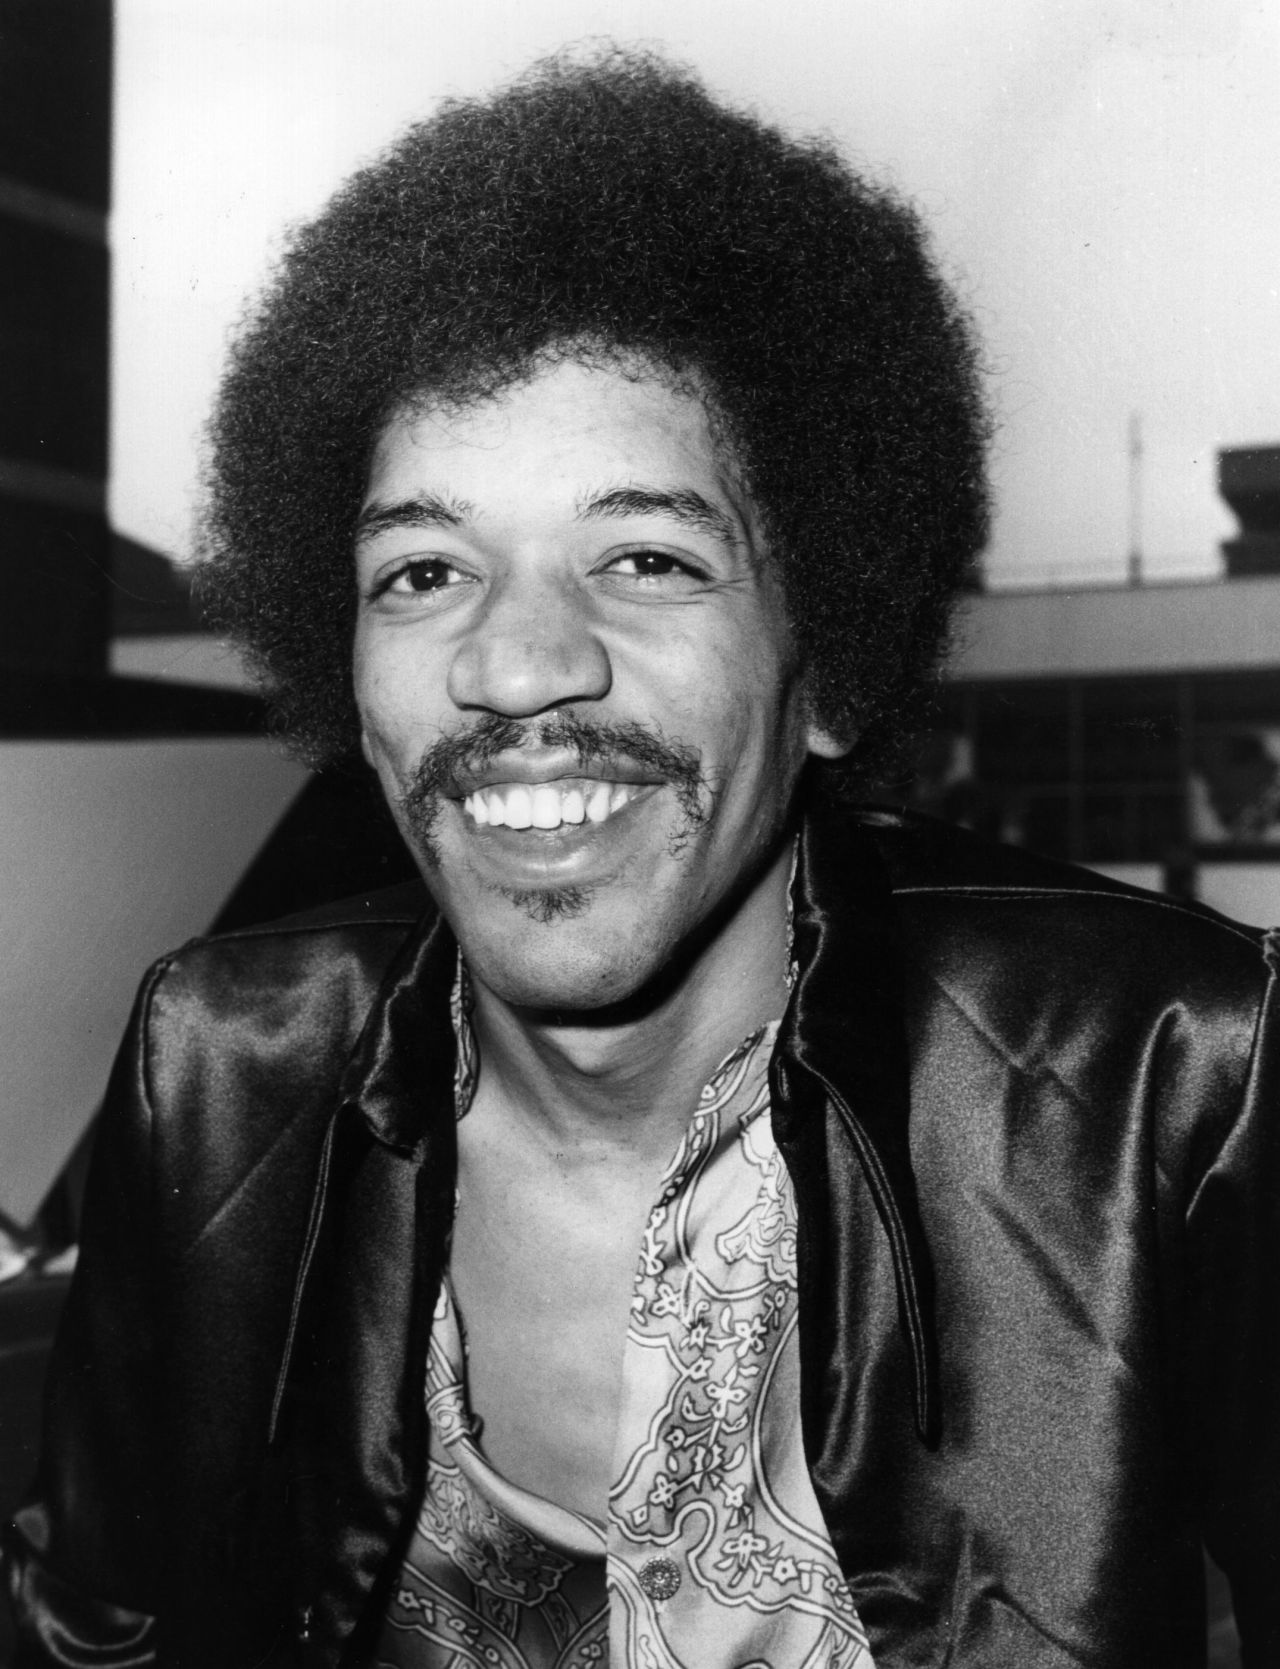 Jimi Hendrix wasn't with us for long, but his influence both in life and in death is staggeringly broad. As <a href="http://lightbox.time.com/2012/11/27/happy-70th-birthday-jimi-hendrix-photos-of-an-incendiary-talent/#5" target="_blank" target="_blank">Time magazine</a> points out, you can hear him in everyone from Metallica to Prince to ZZ Top to the Red Hot Chili Peppers. The music and style legend would have turned 70 on Tuesday, November 27, and we're celebrating by looking back at Hendrix in his heyday. 